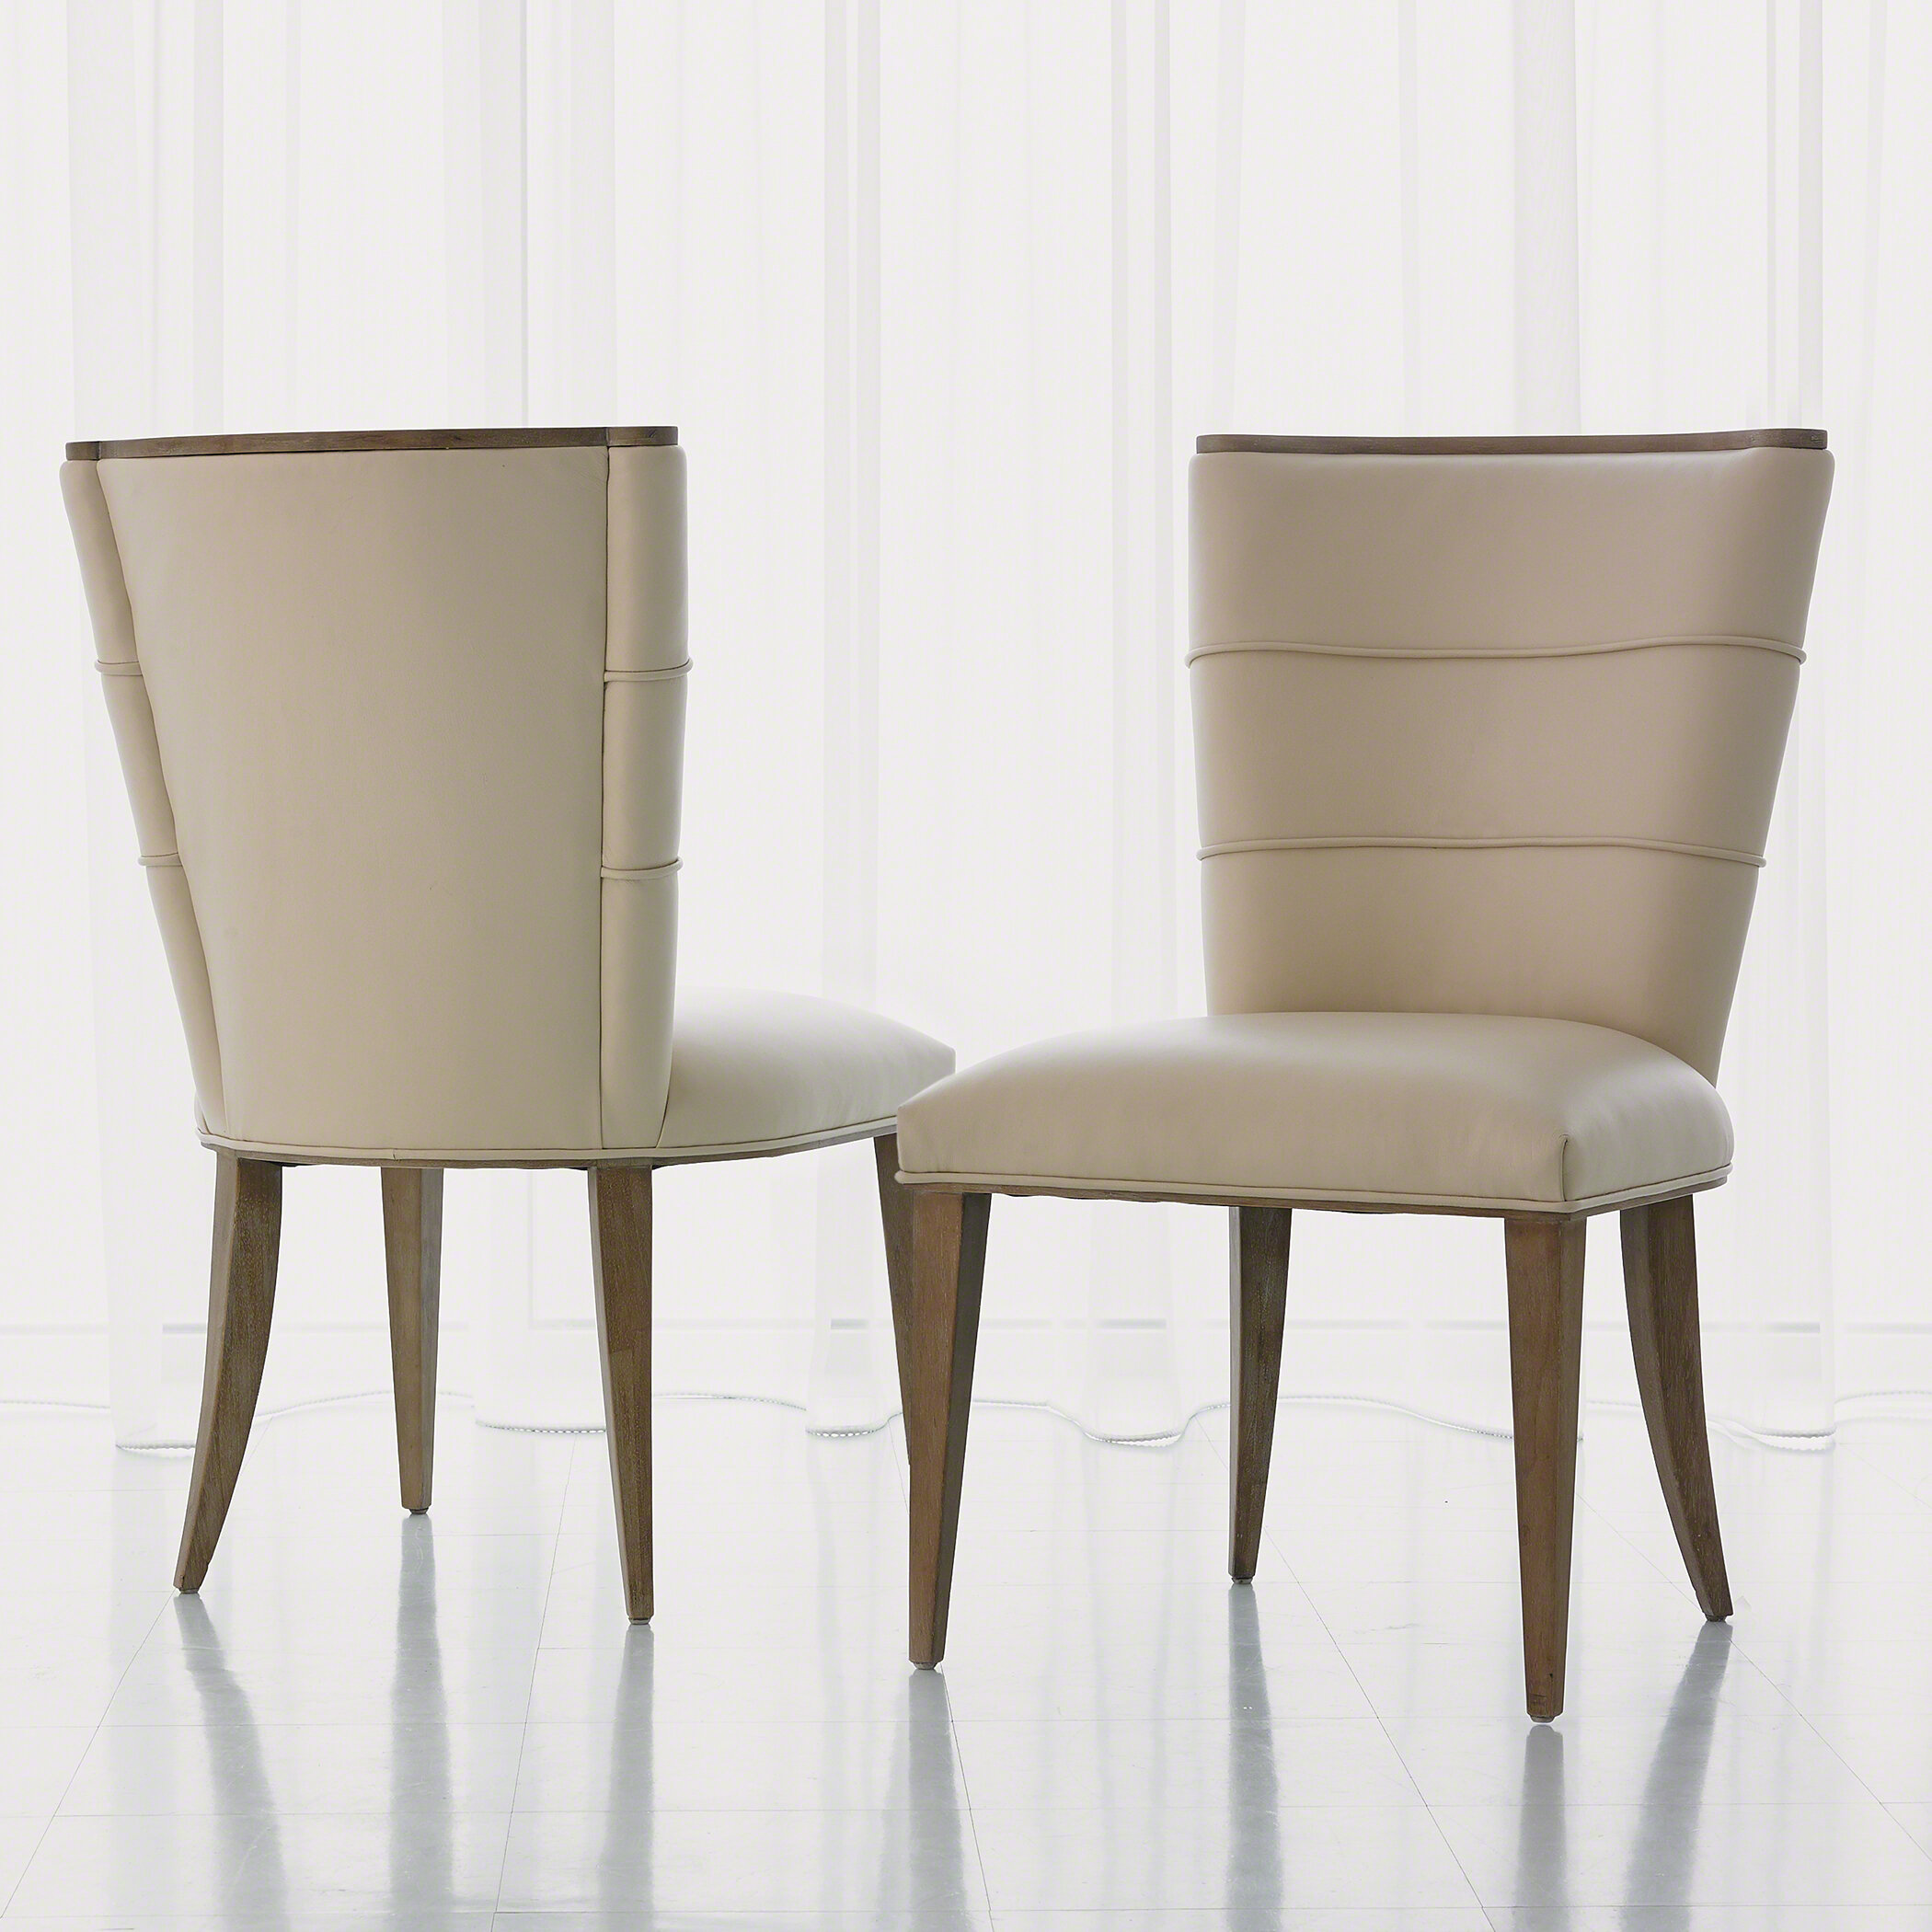 Studio A Adelaide Upholstered Dining Chair Wayfair